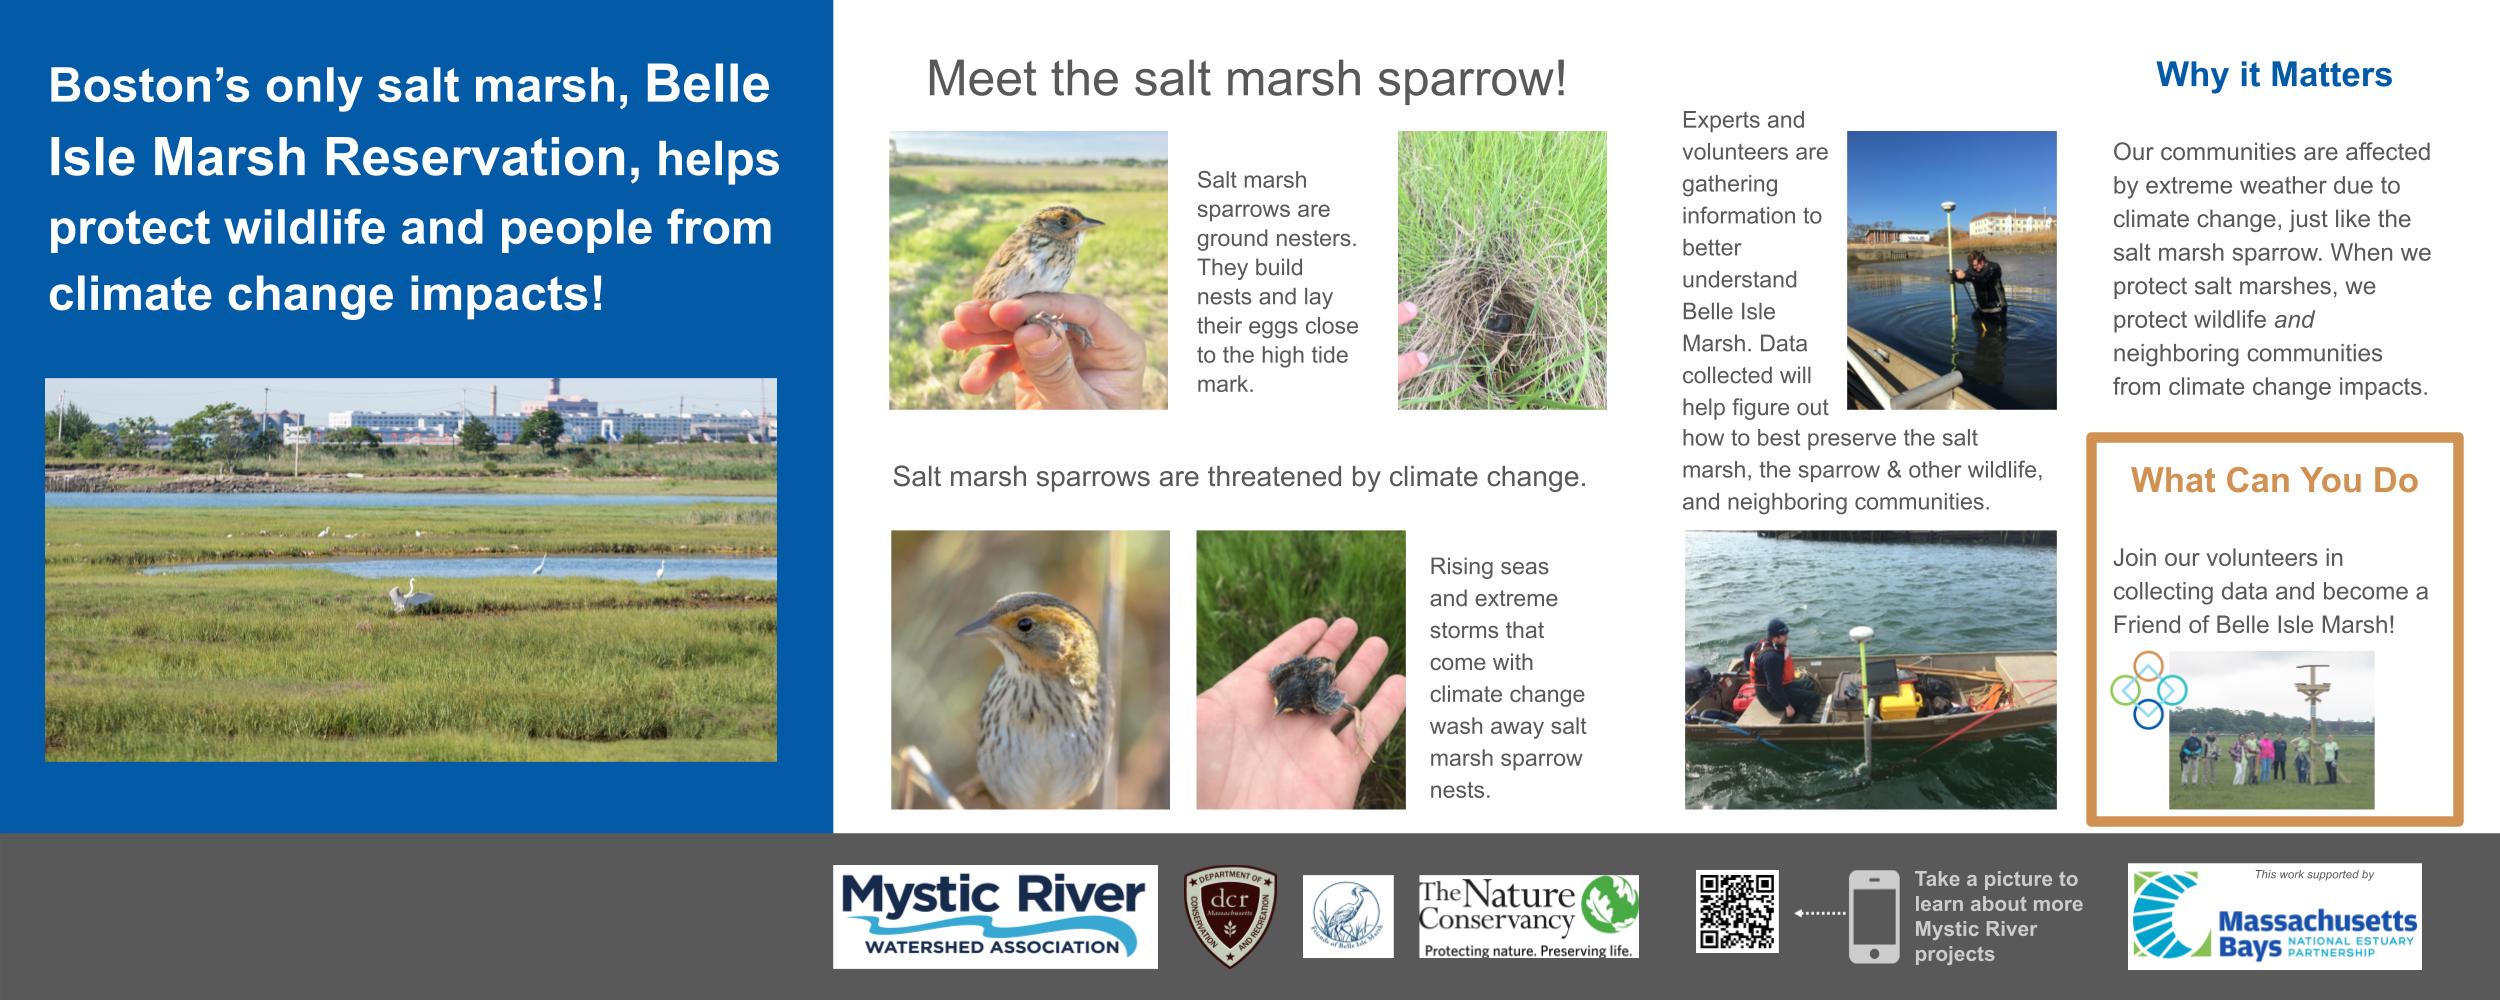 Poster includes photos and information about the Salt Marsh Sparrow, a species threatened by sea level rise. The poster presents information about efforts to collect data information that will help support the long-term health of the marsh.